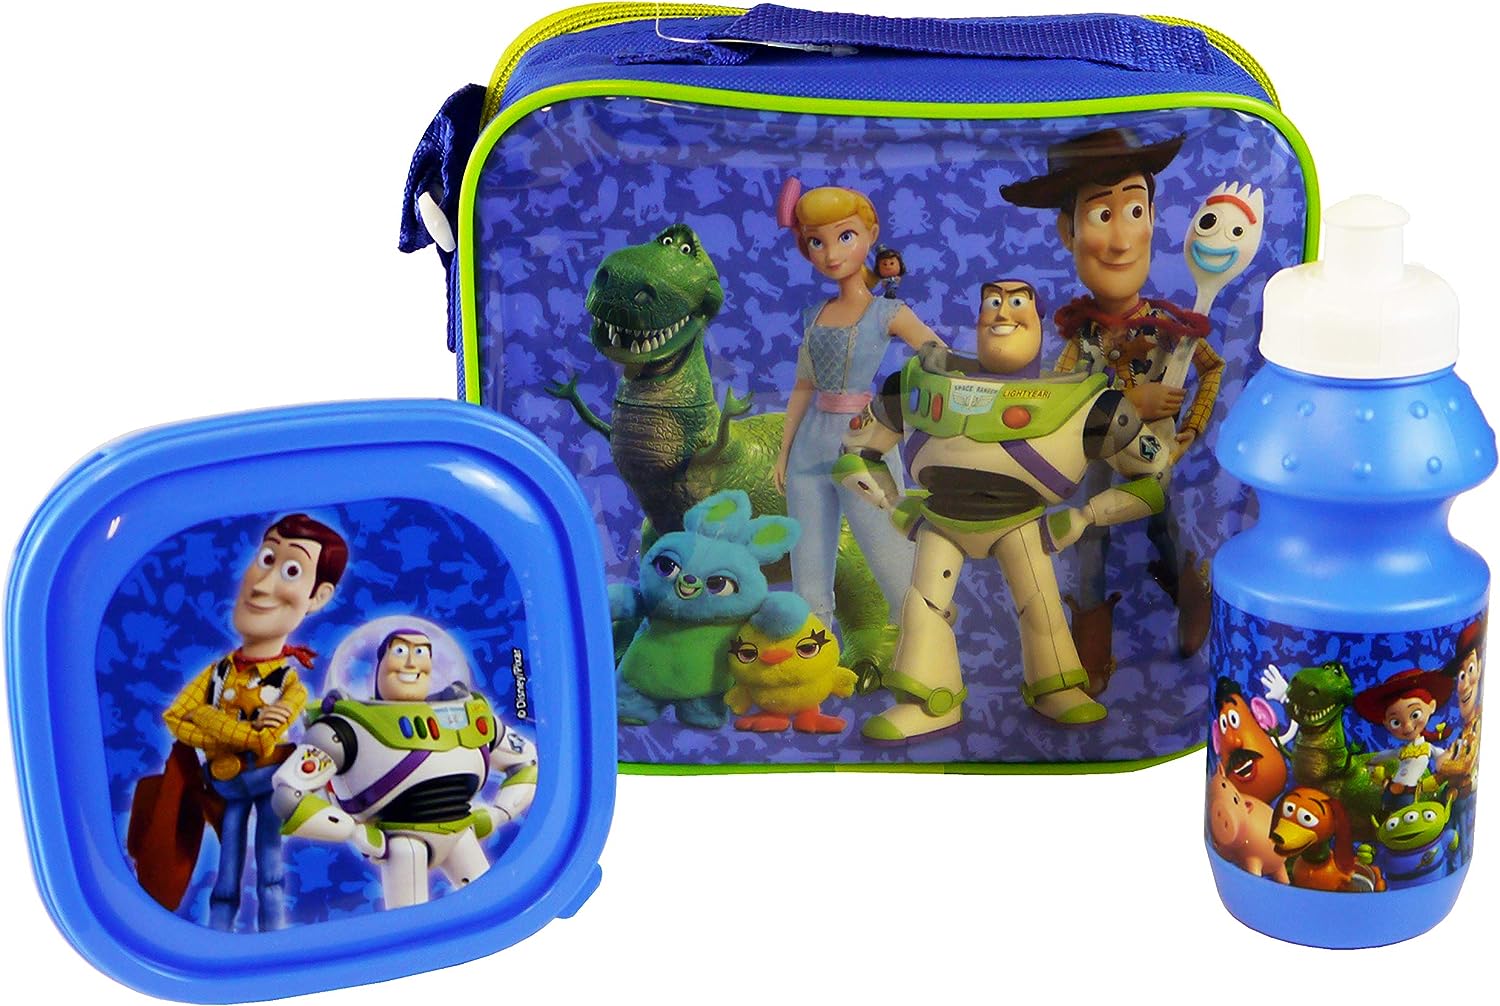 https://storables.com/wp-content/uploads/2023/08/15-amazing-toy-story-lunch-box-for-2023-1692013537.jpg